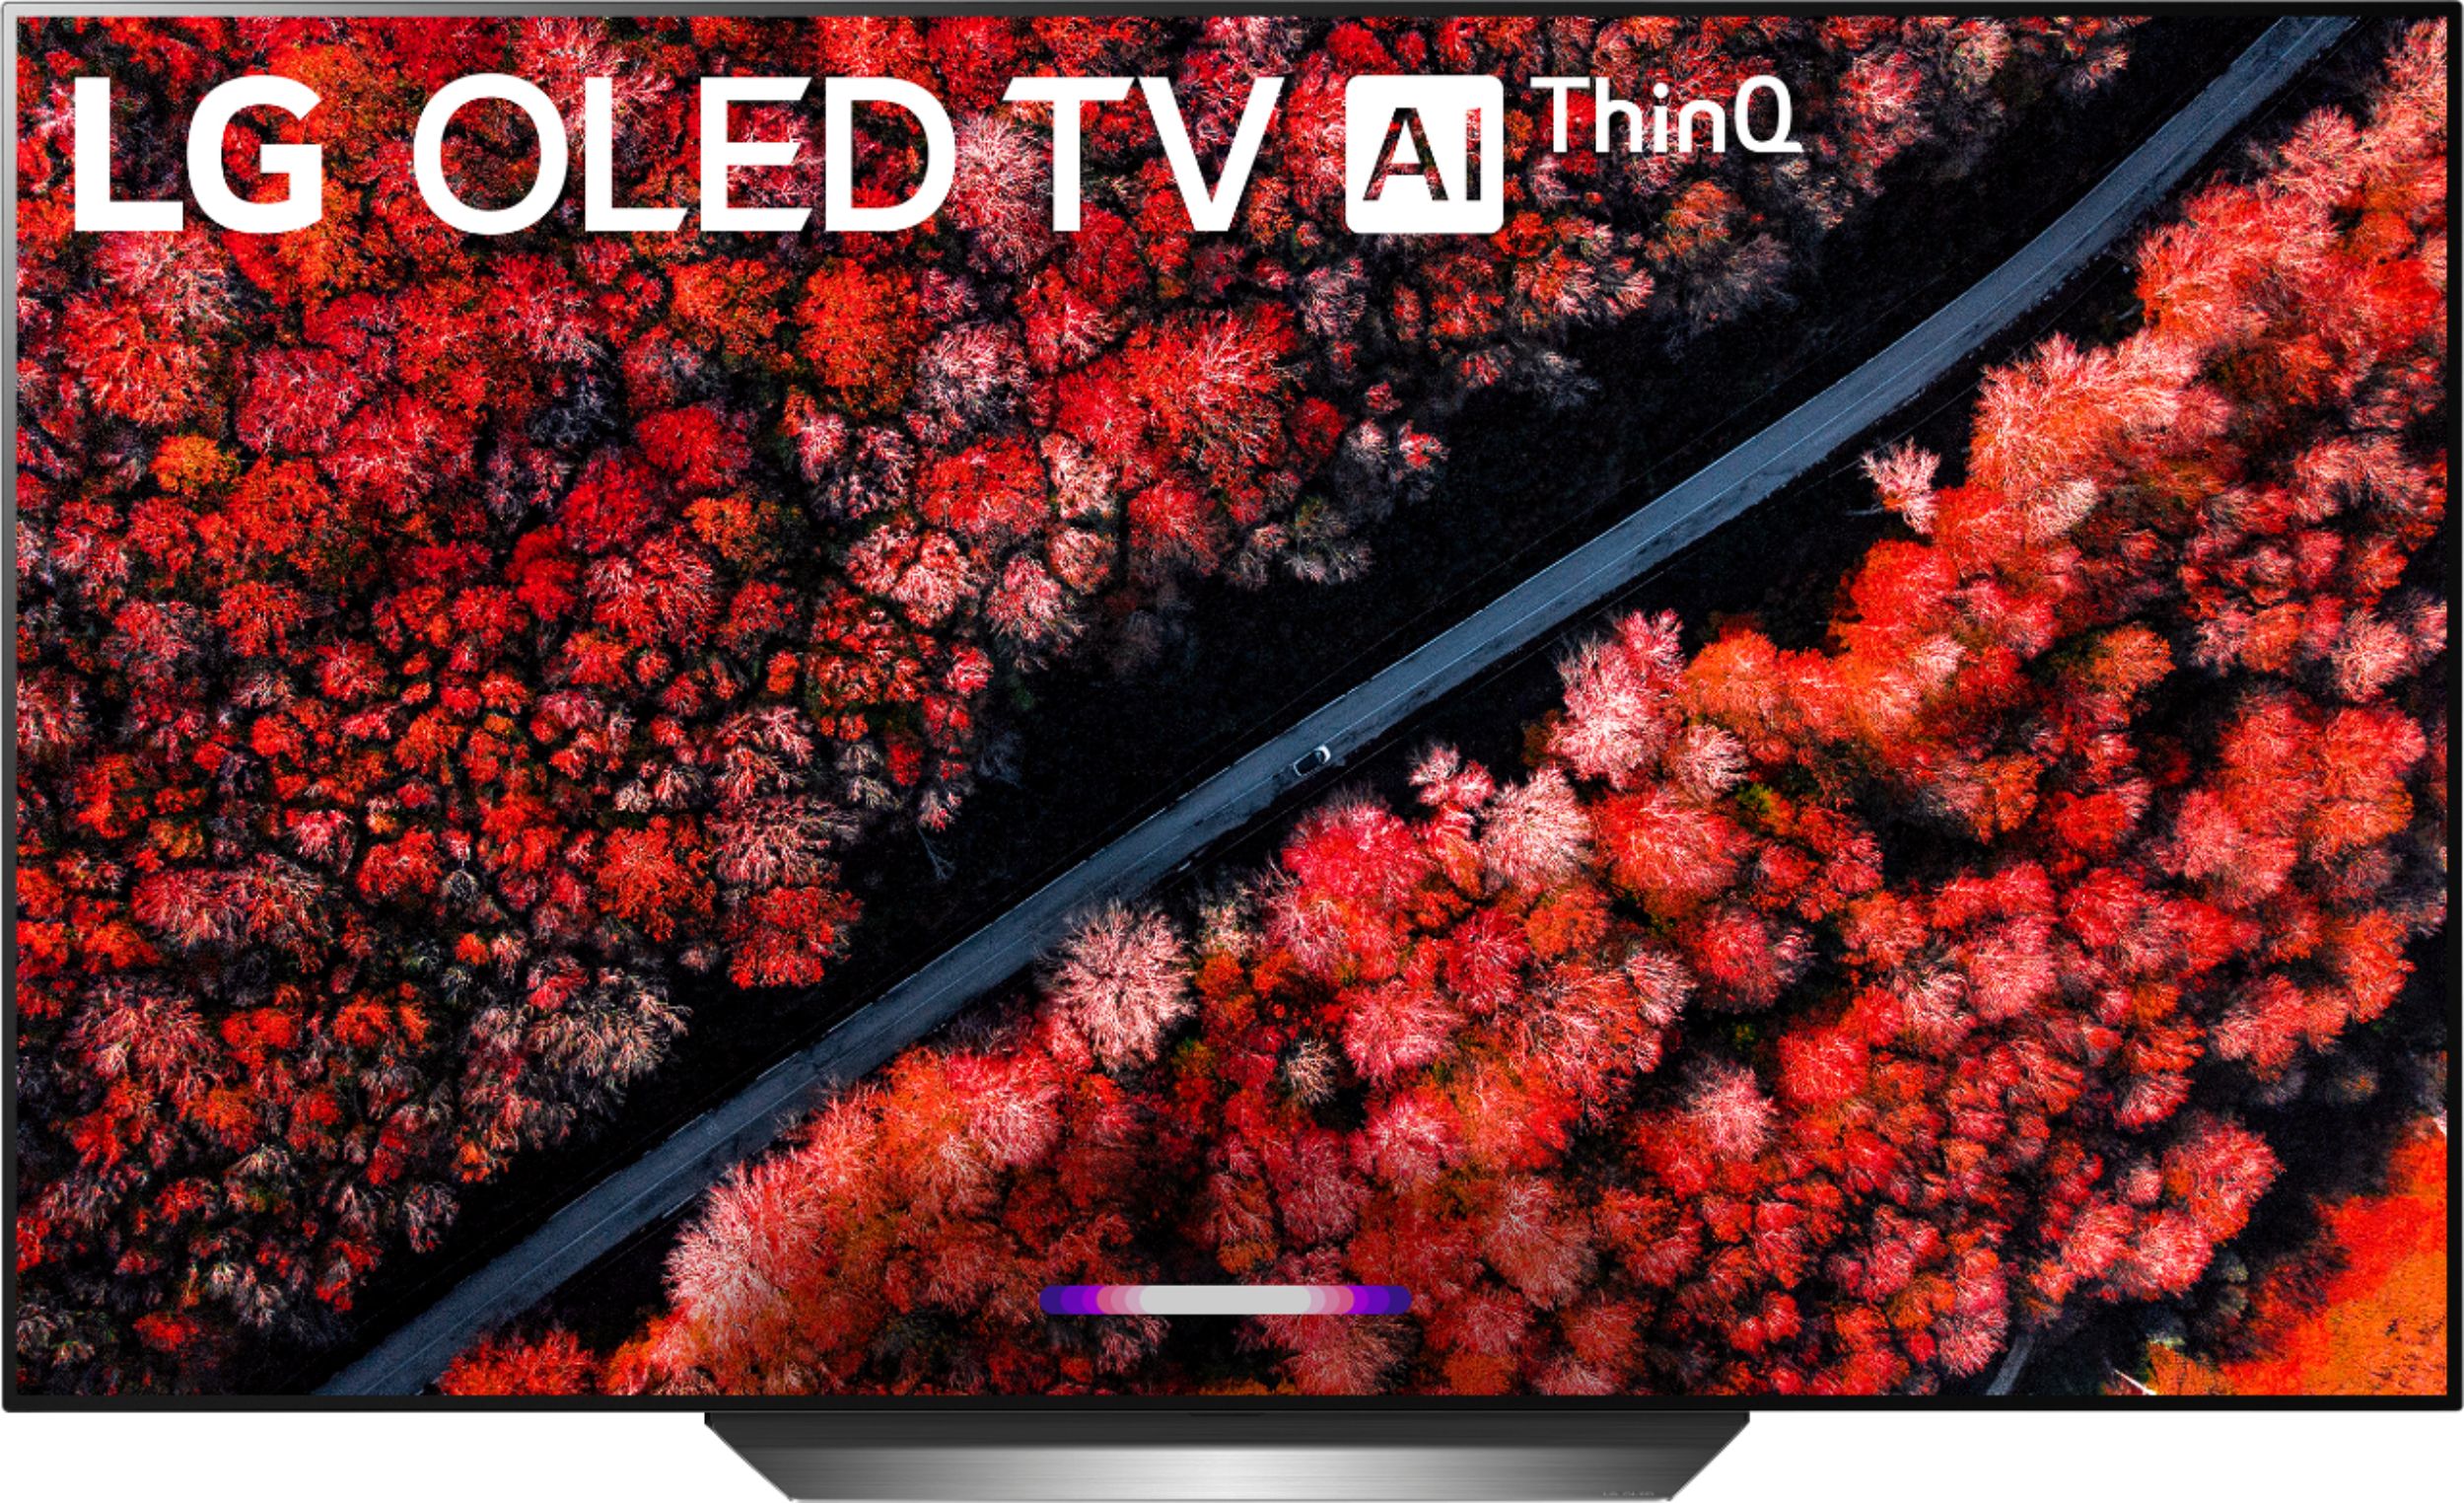 LG - 77" Class - OLED - C9 Series - 2160p - Smart - 4K UHD TV with HDR